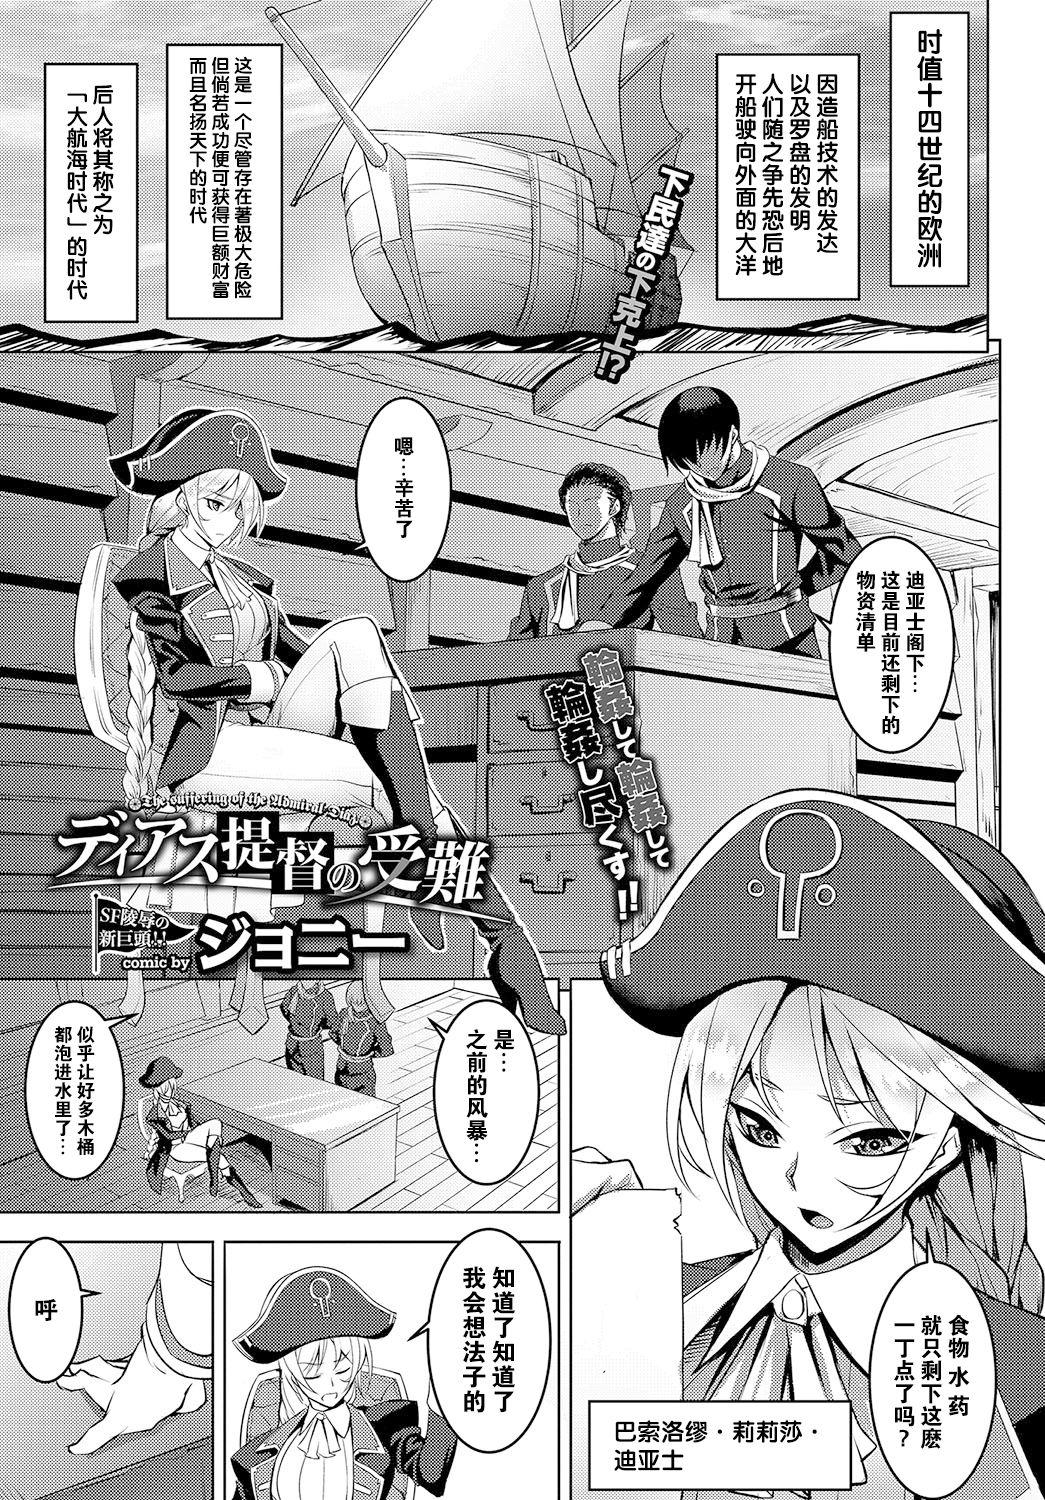 Longhair Diaz Teitoku no Junan - The suffering of the Admiral Diaz Fucking Sex - Page 2